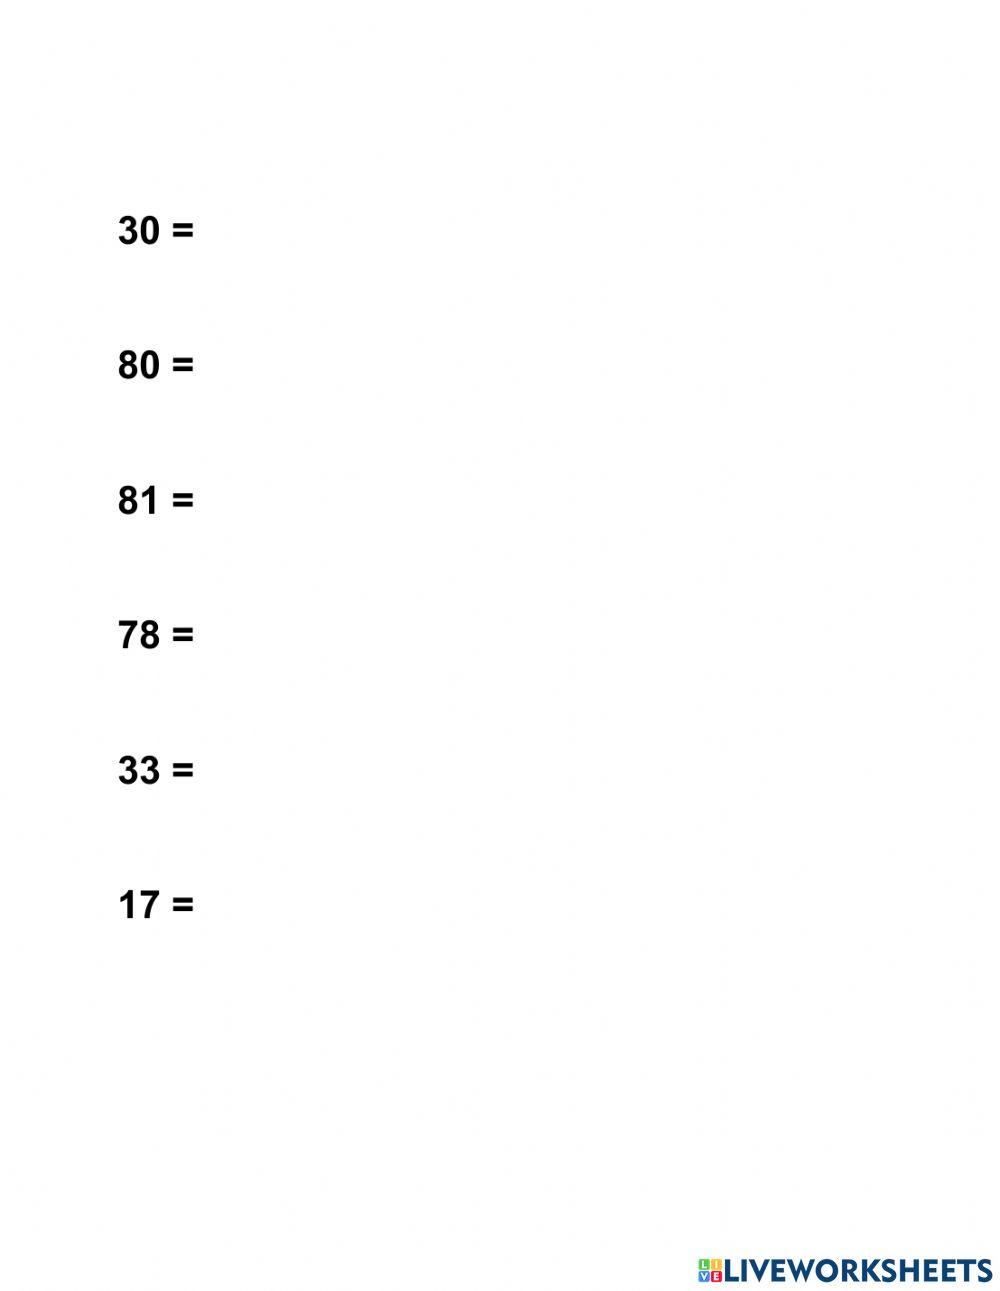 Place value expanded form (in figures)